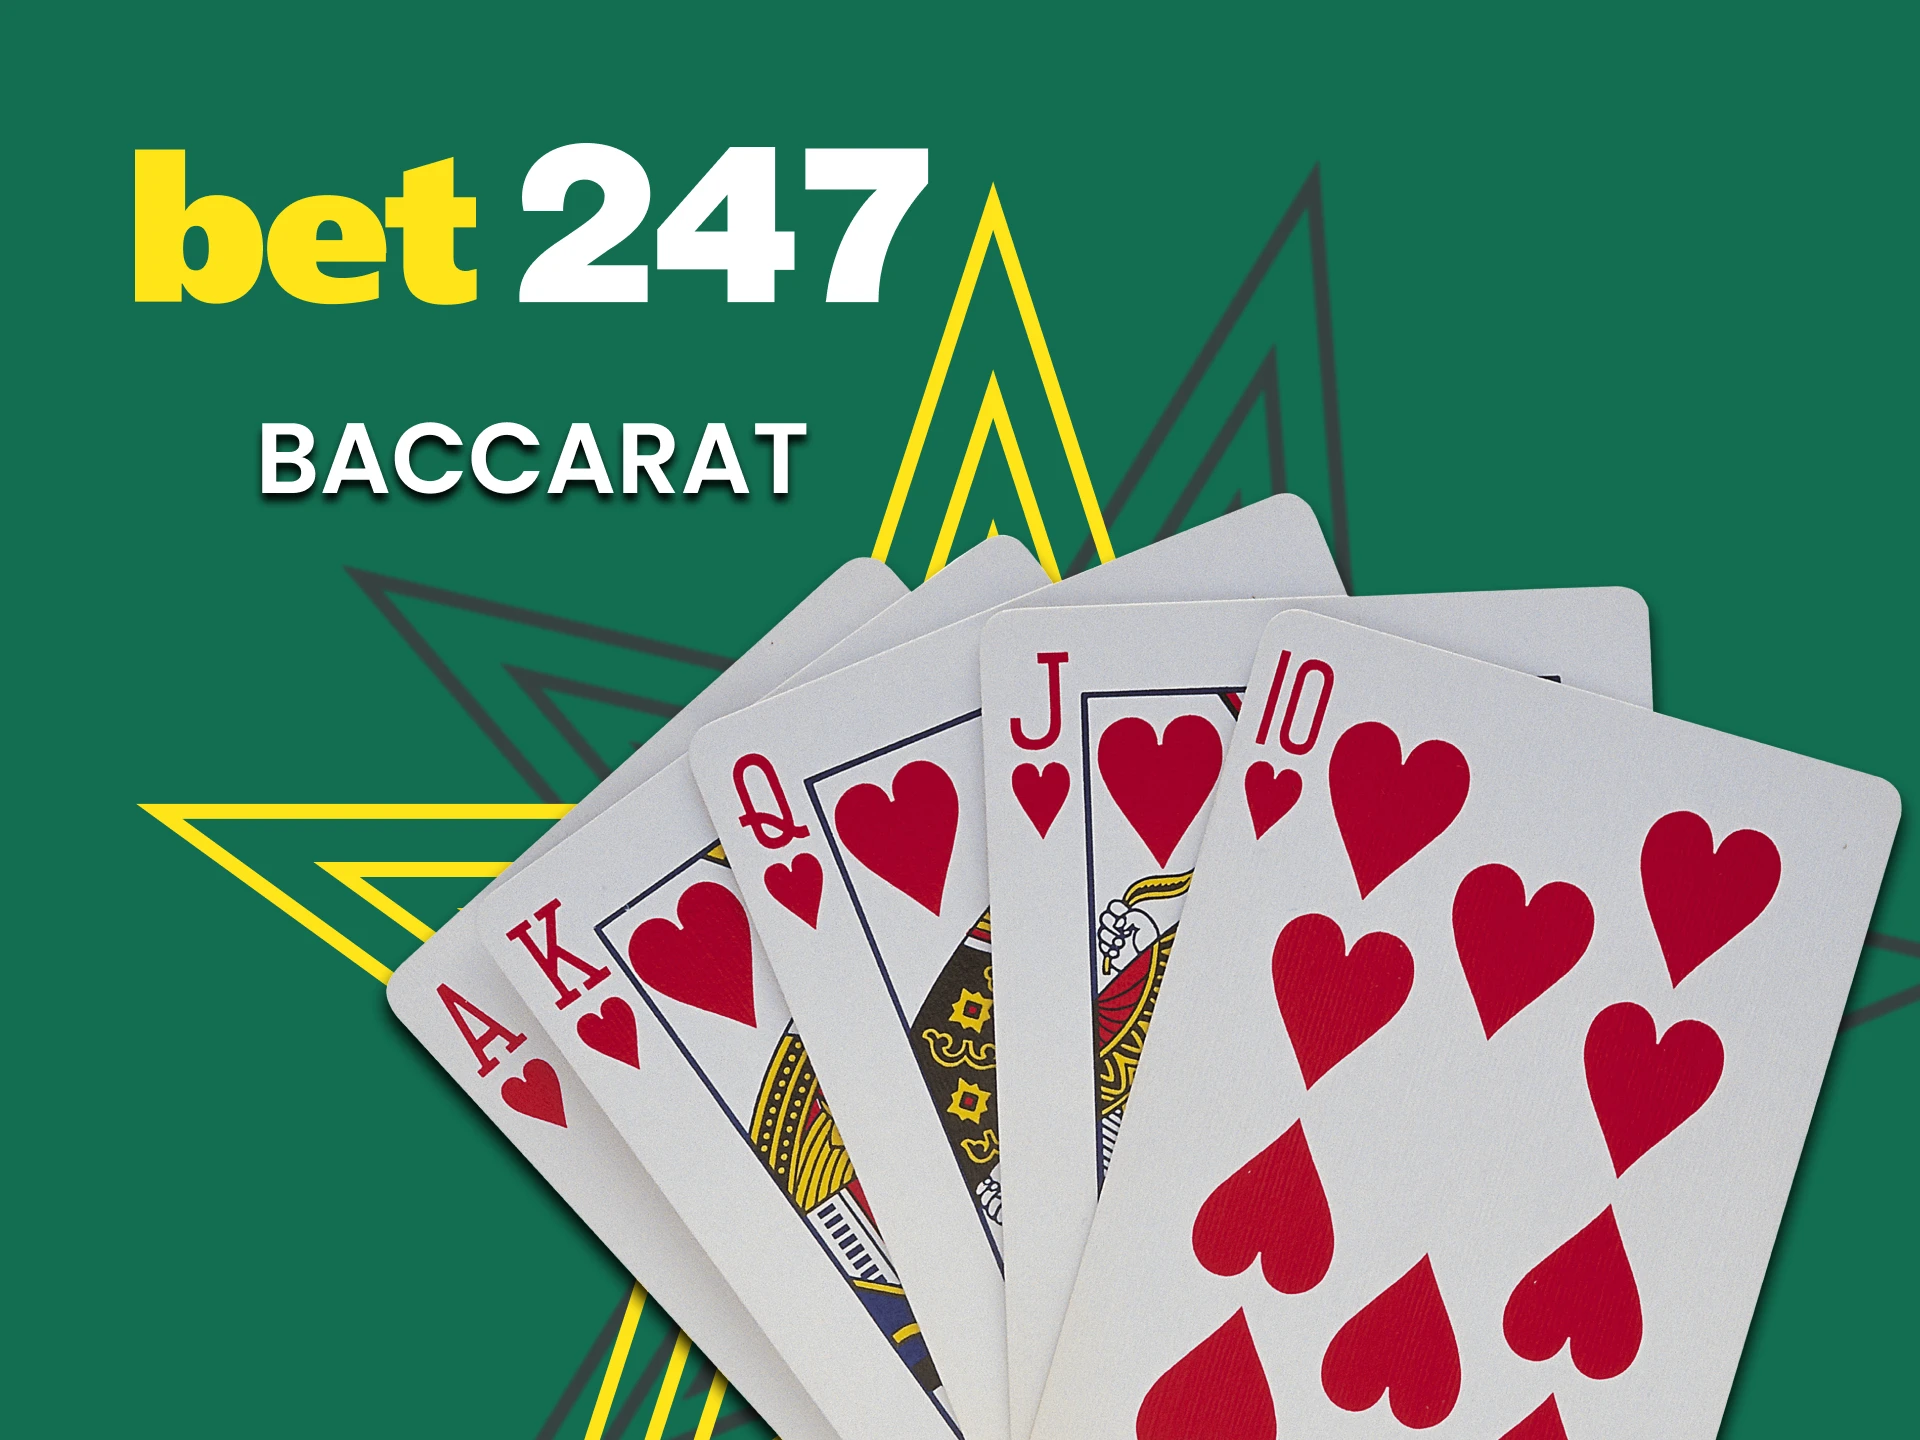 Play baccarat with Bet247.